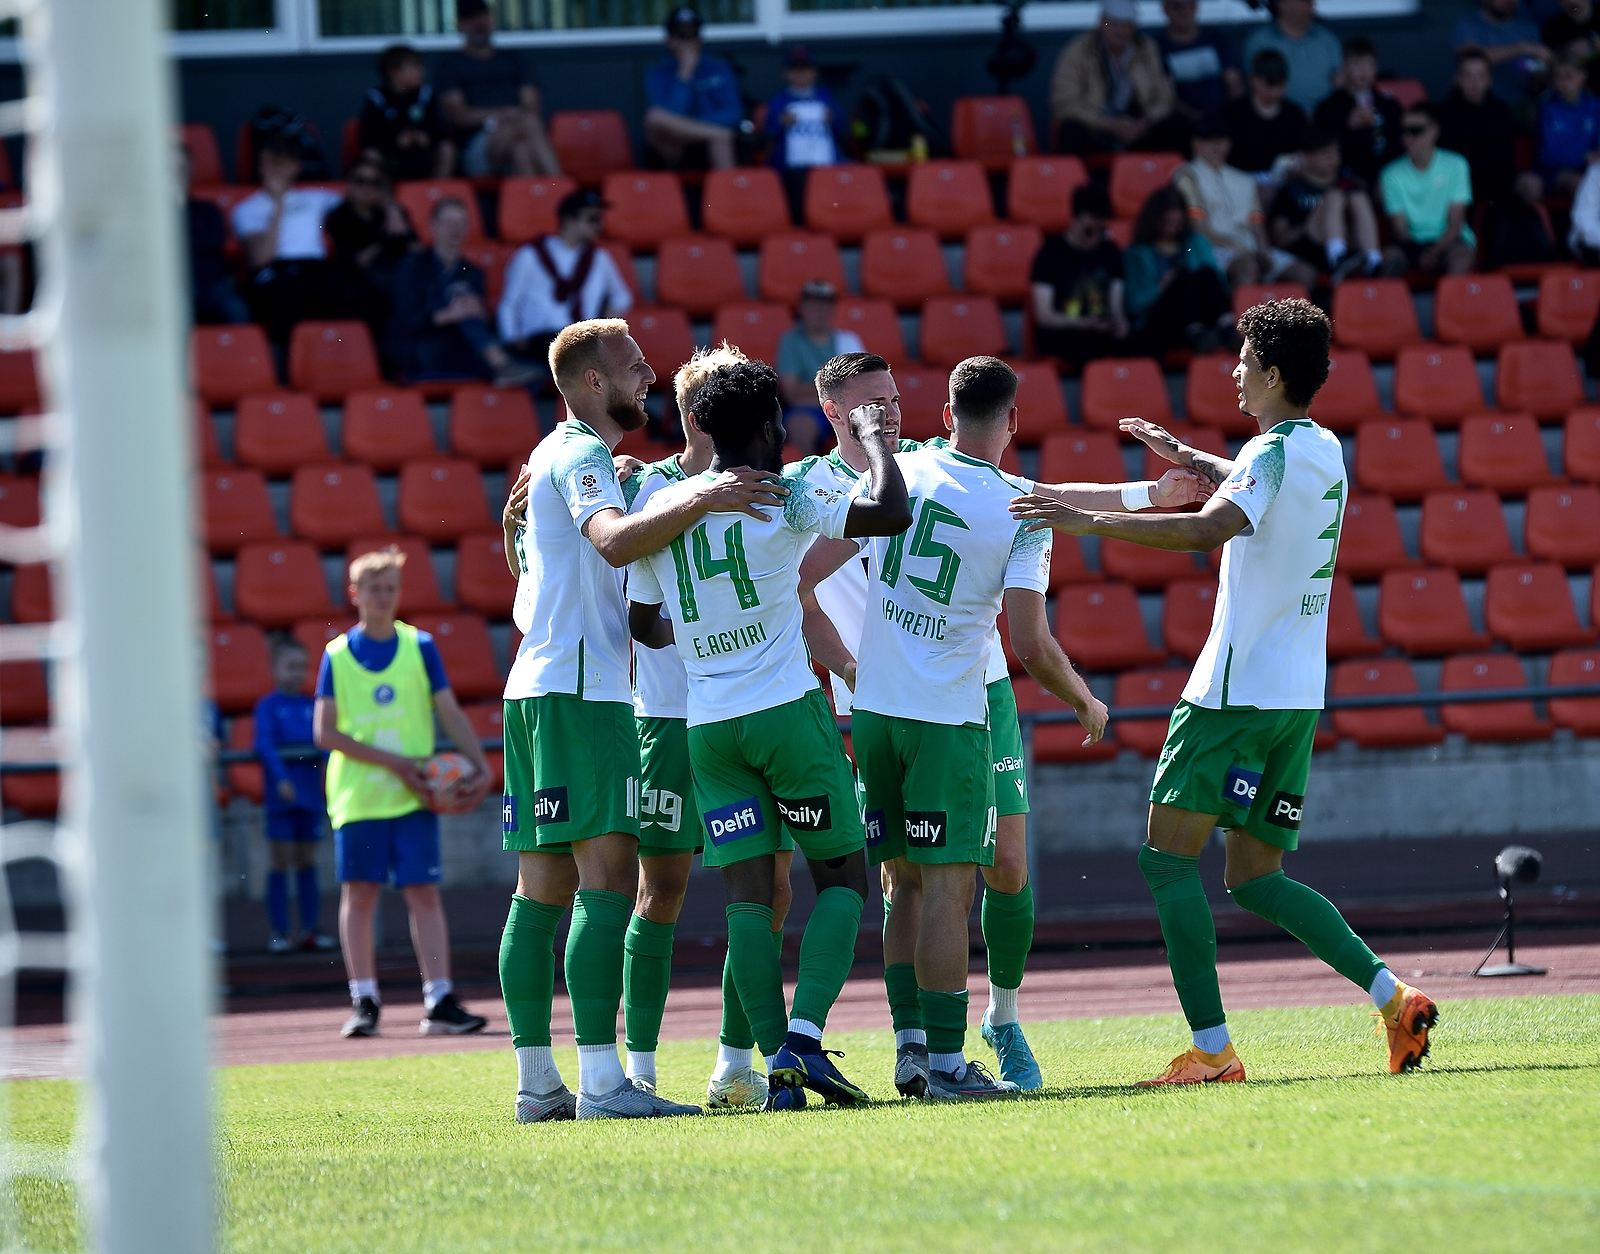 Ernest Agyiri provides assist in FCI Levadia's draw with Tammeka